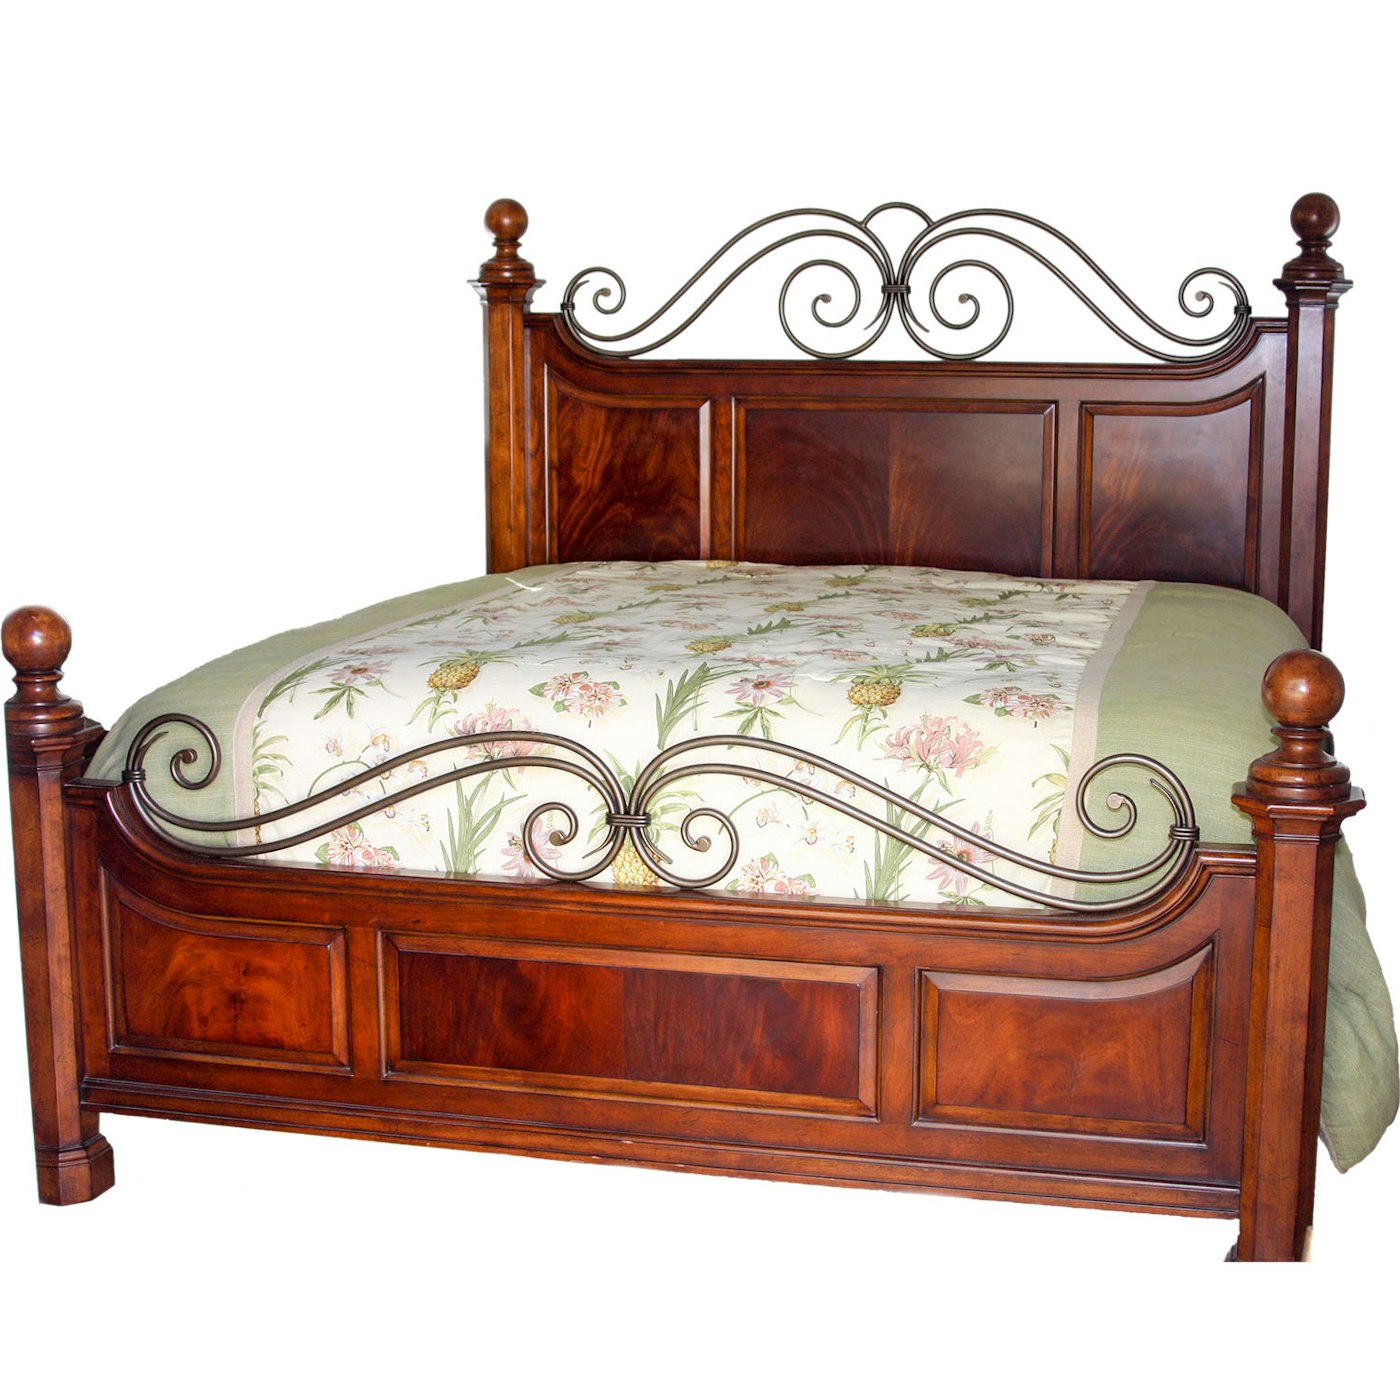 Thomasville King Size Bed Frame | EBTH